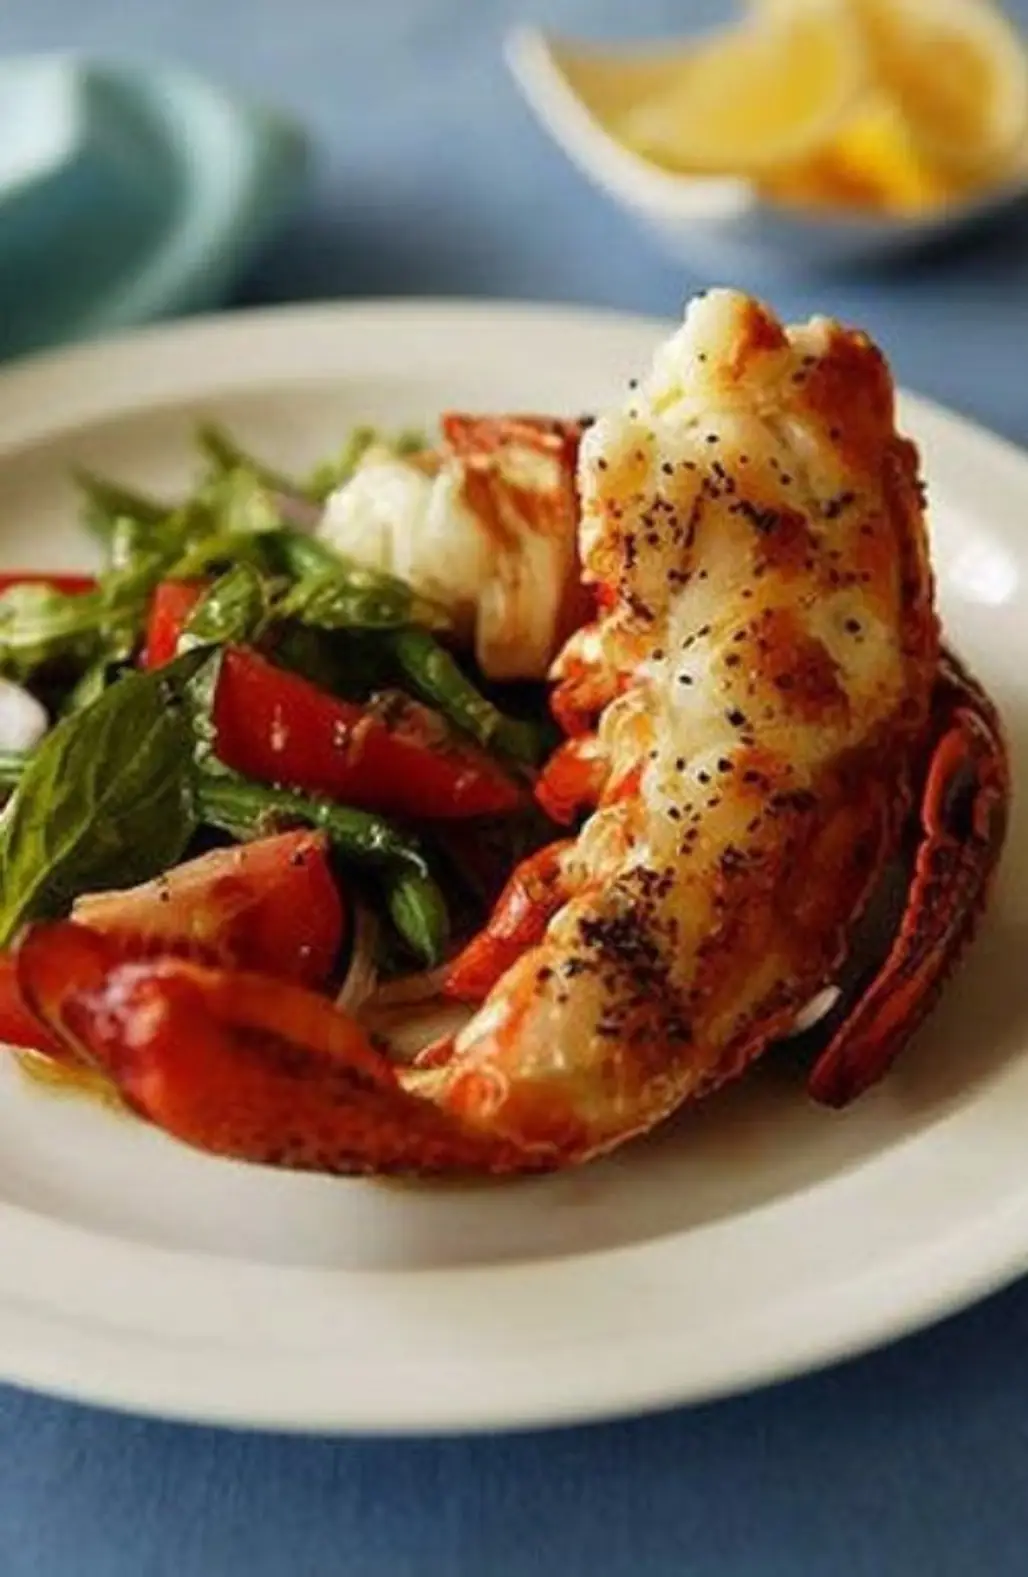 Lobster Tail with Greens